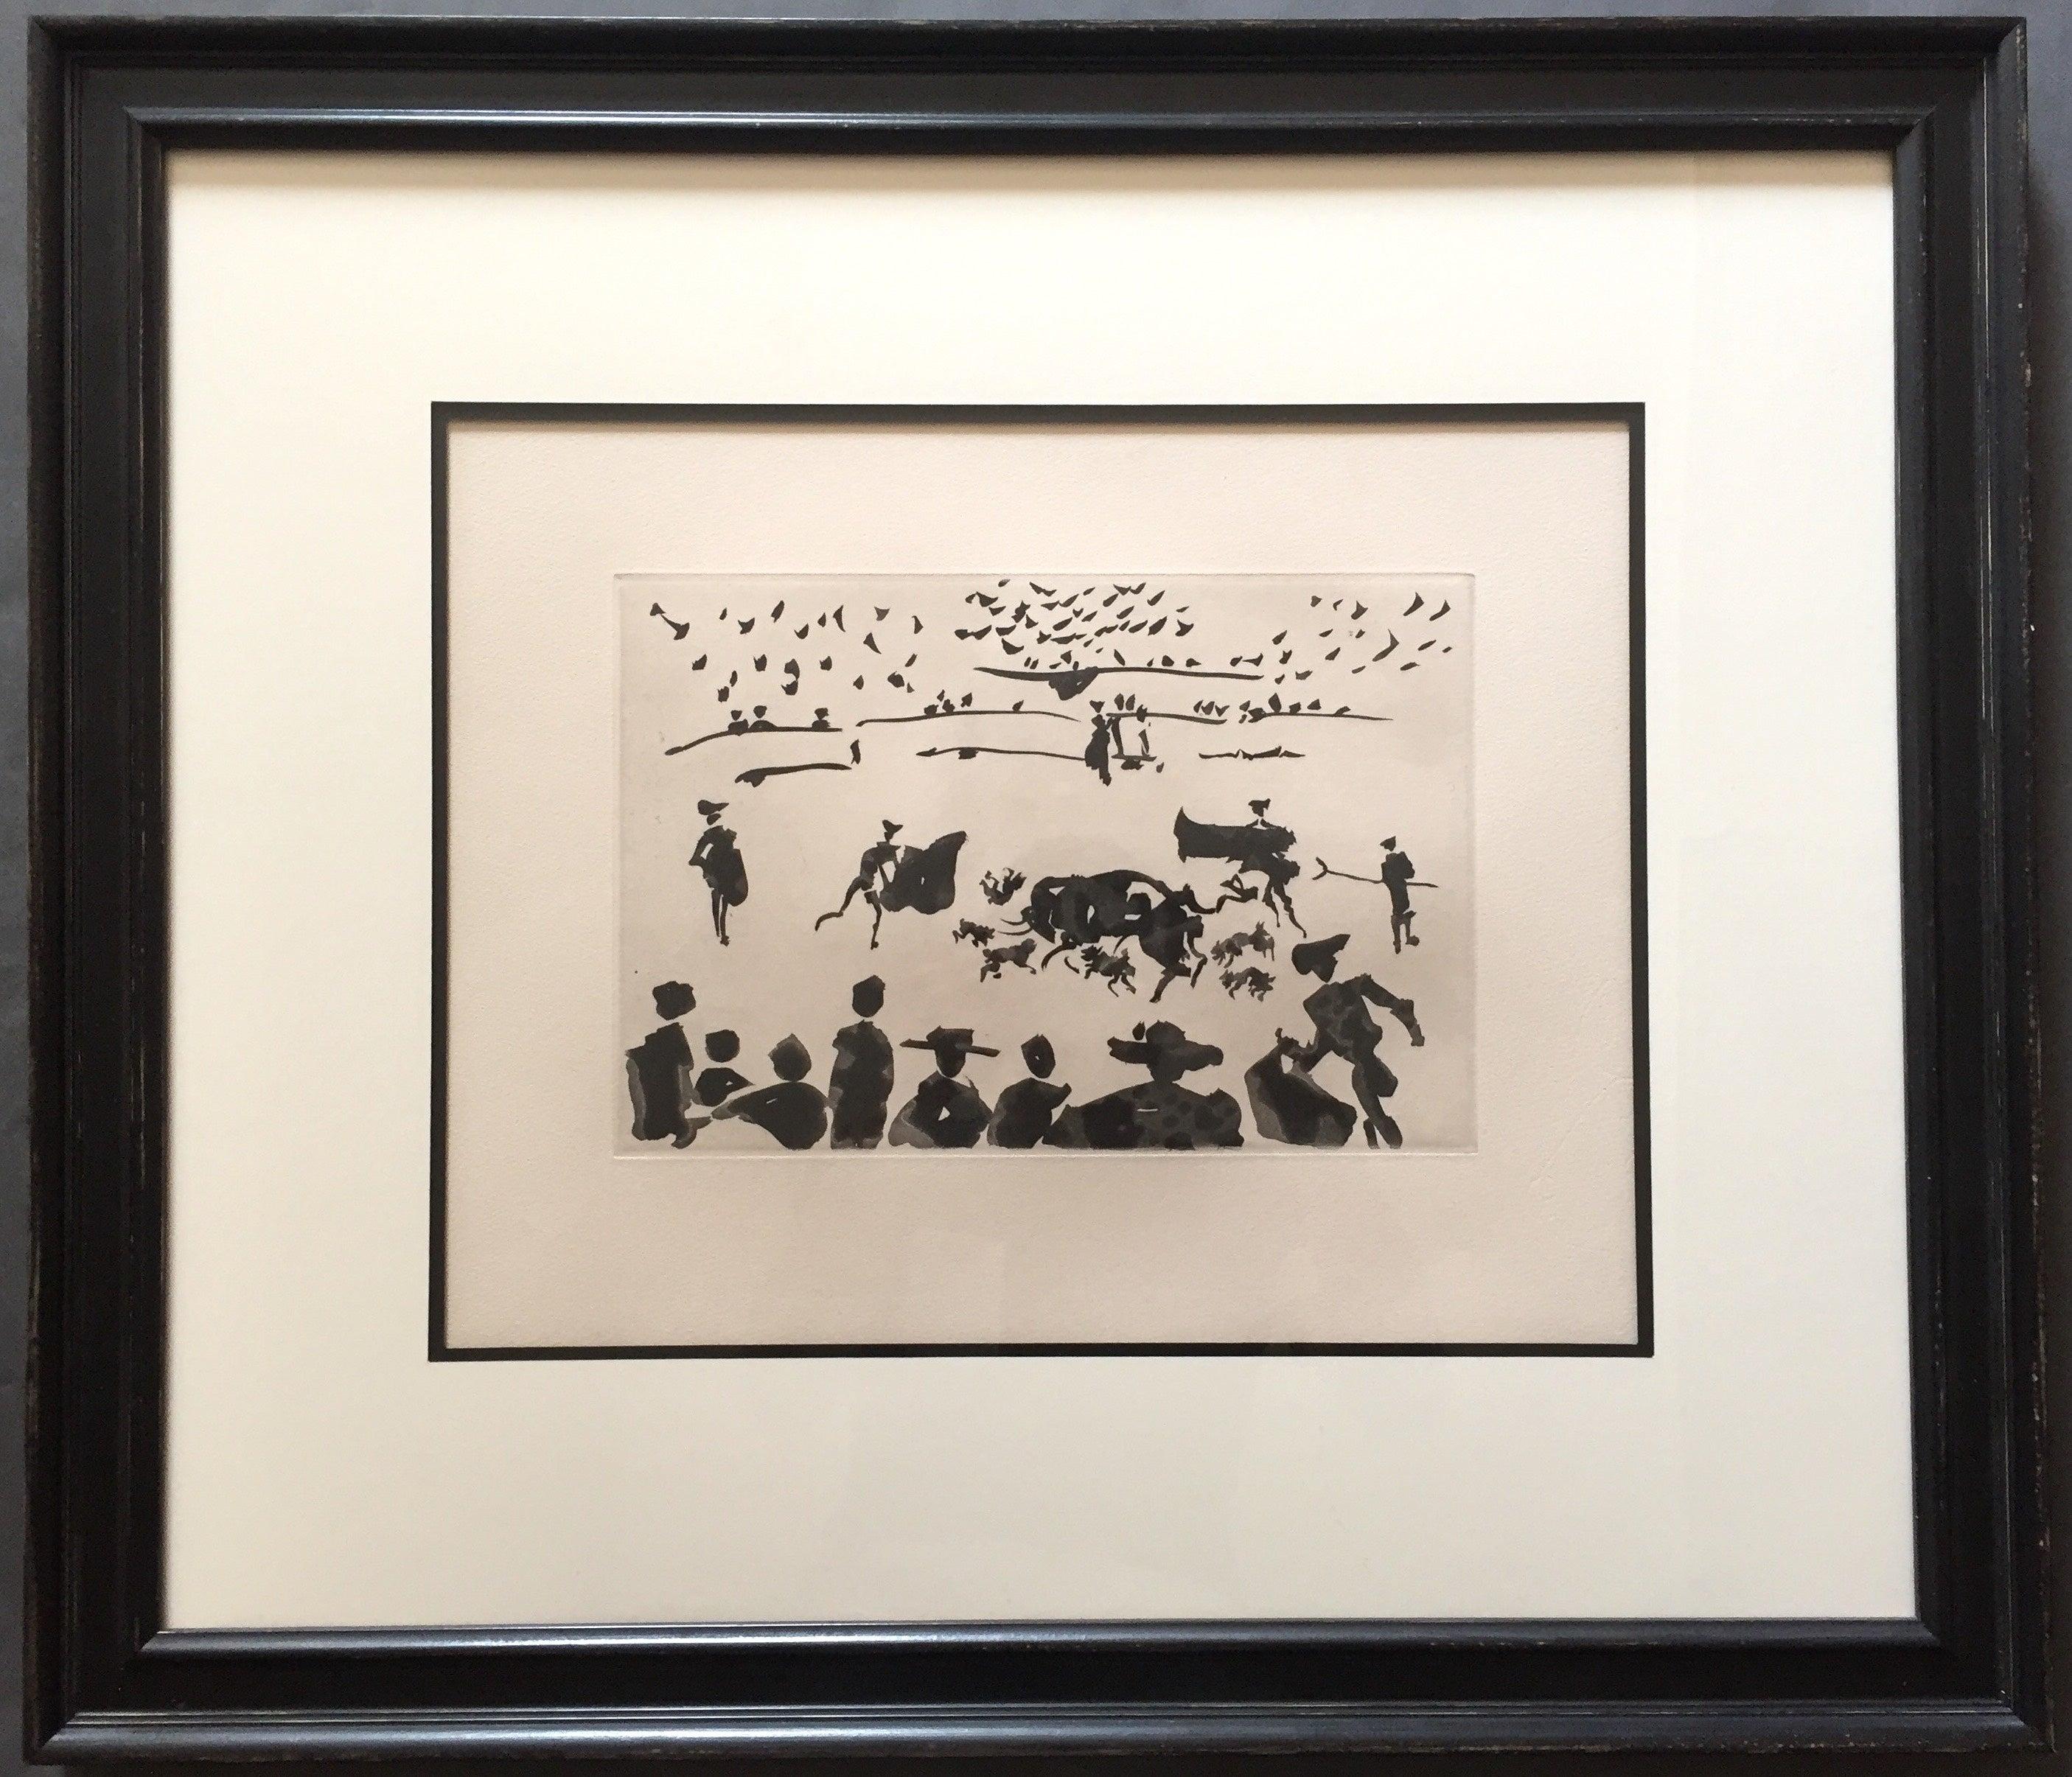 Echan Perros al Toro (Releasing Dogs on the Bull) - Print by Pablo Picasso